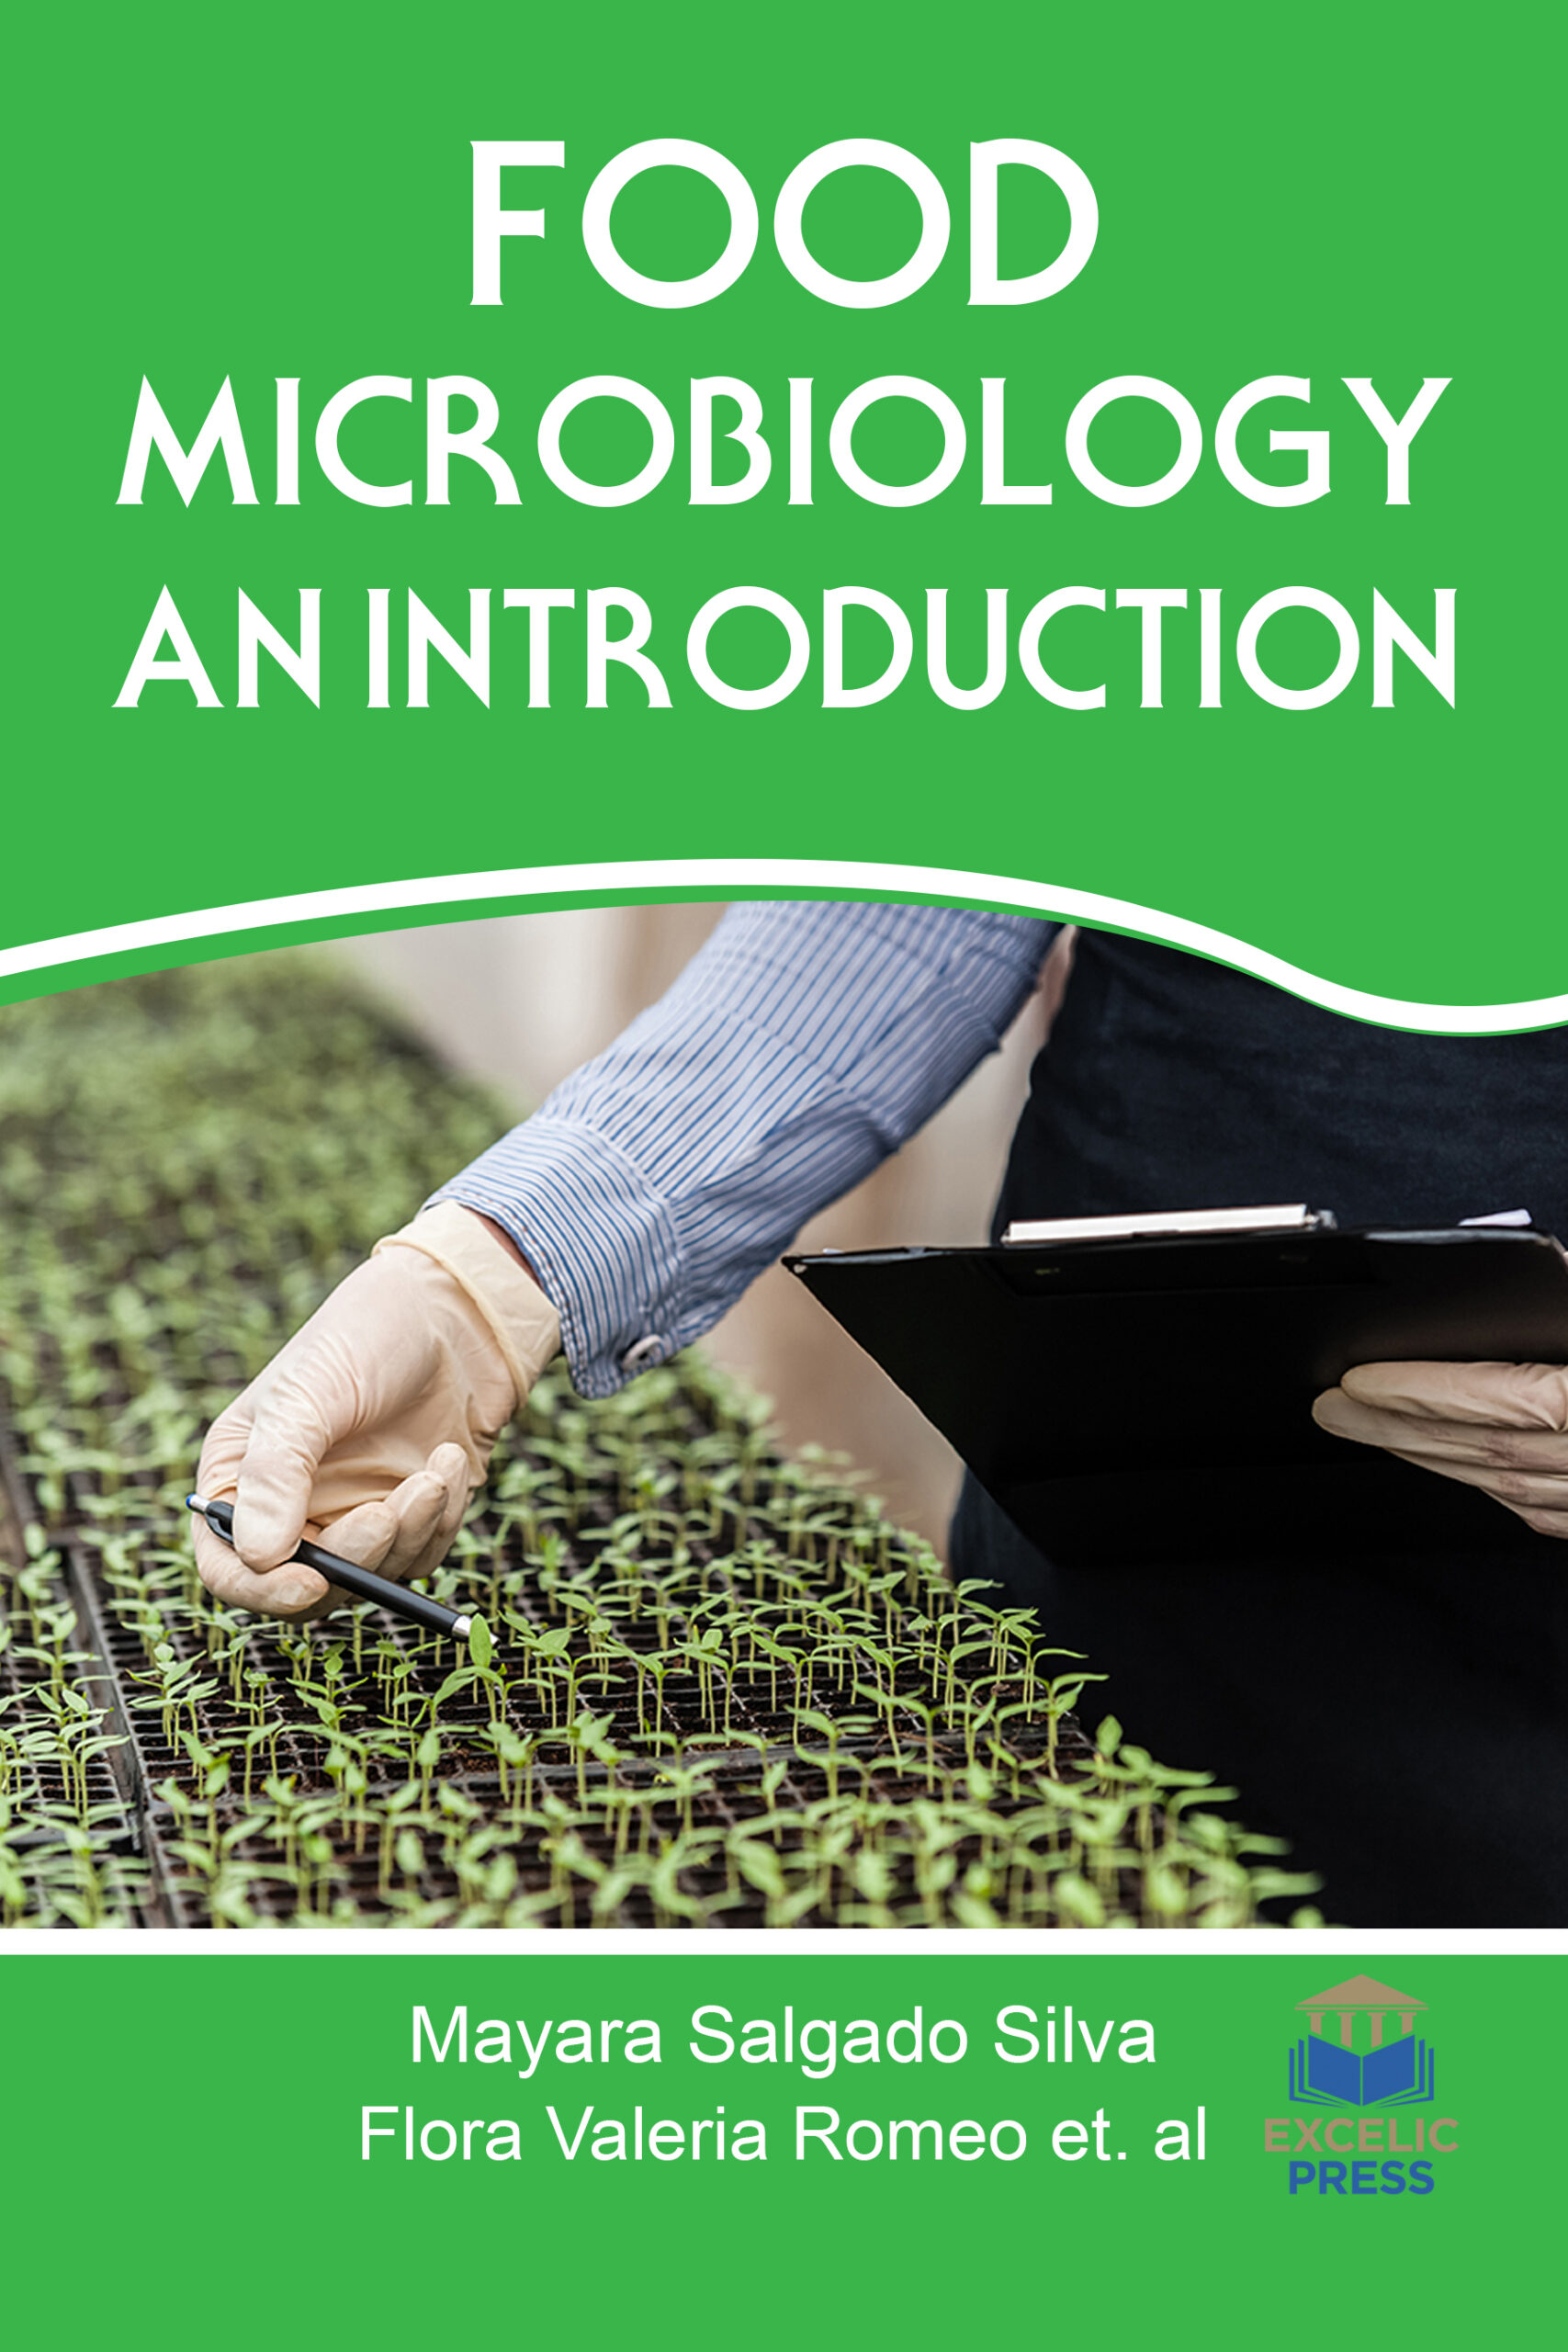 thesis topics for food microbiology